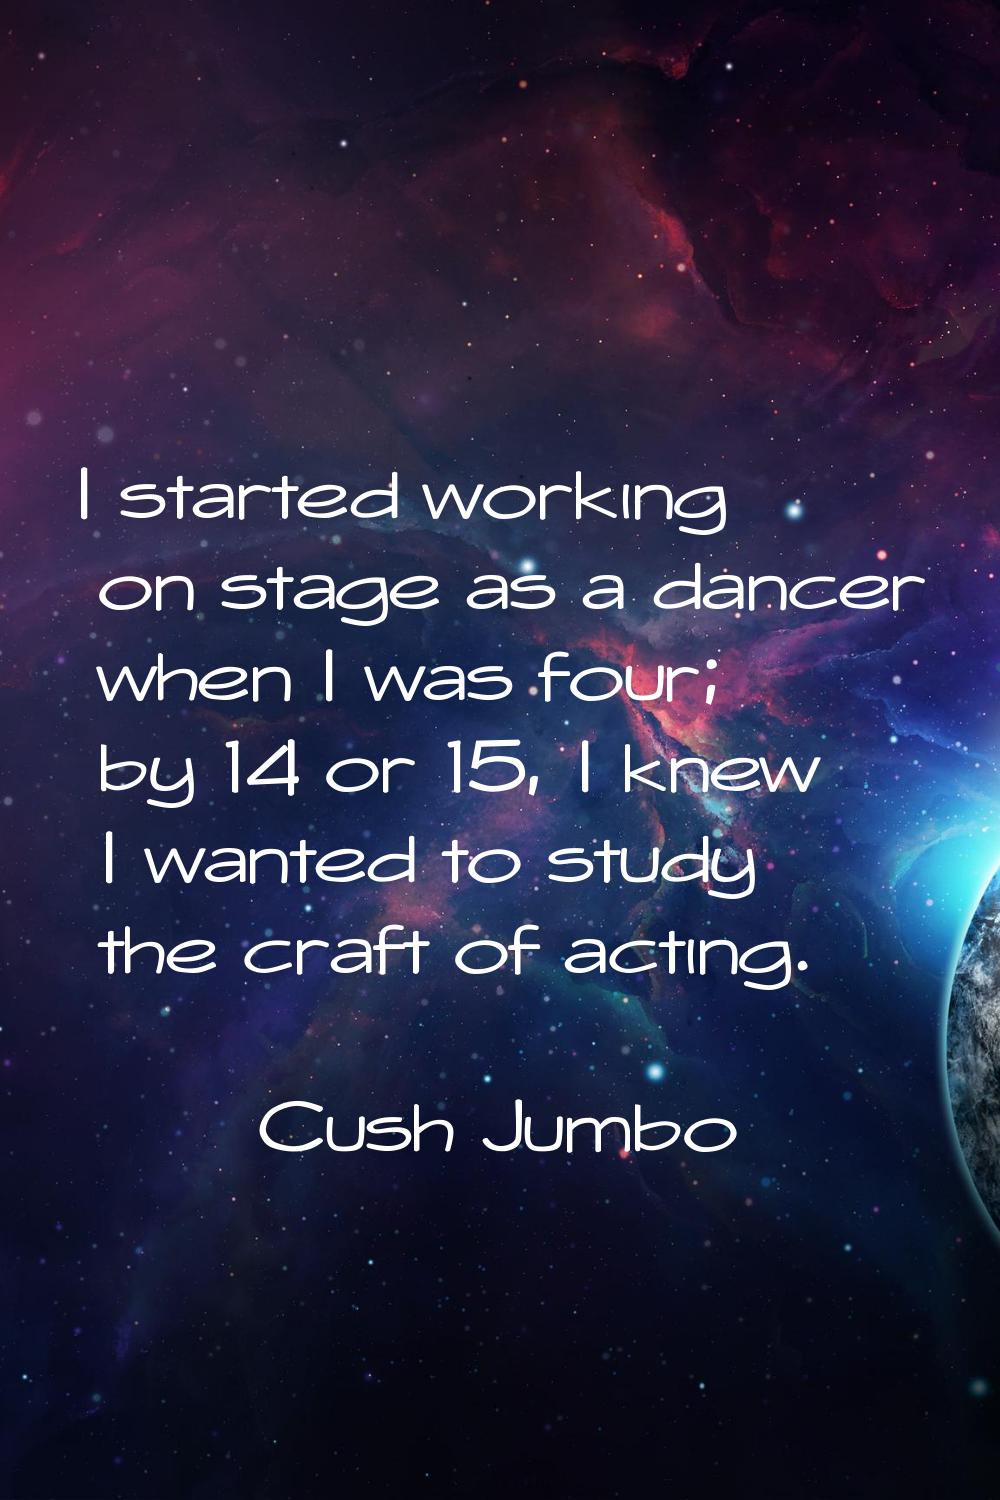 I started working on stage as a dancer when I was four; by 14 or 15, I knew I wanted to study the c